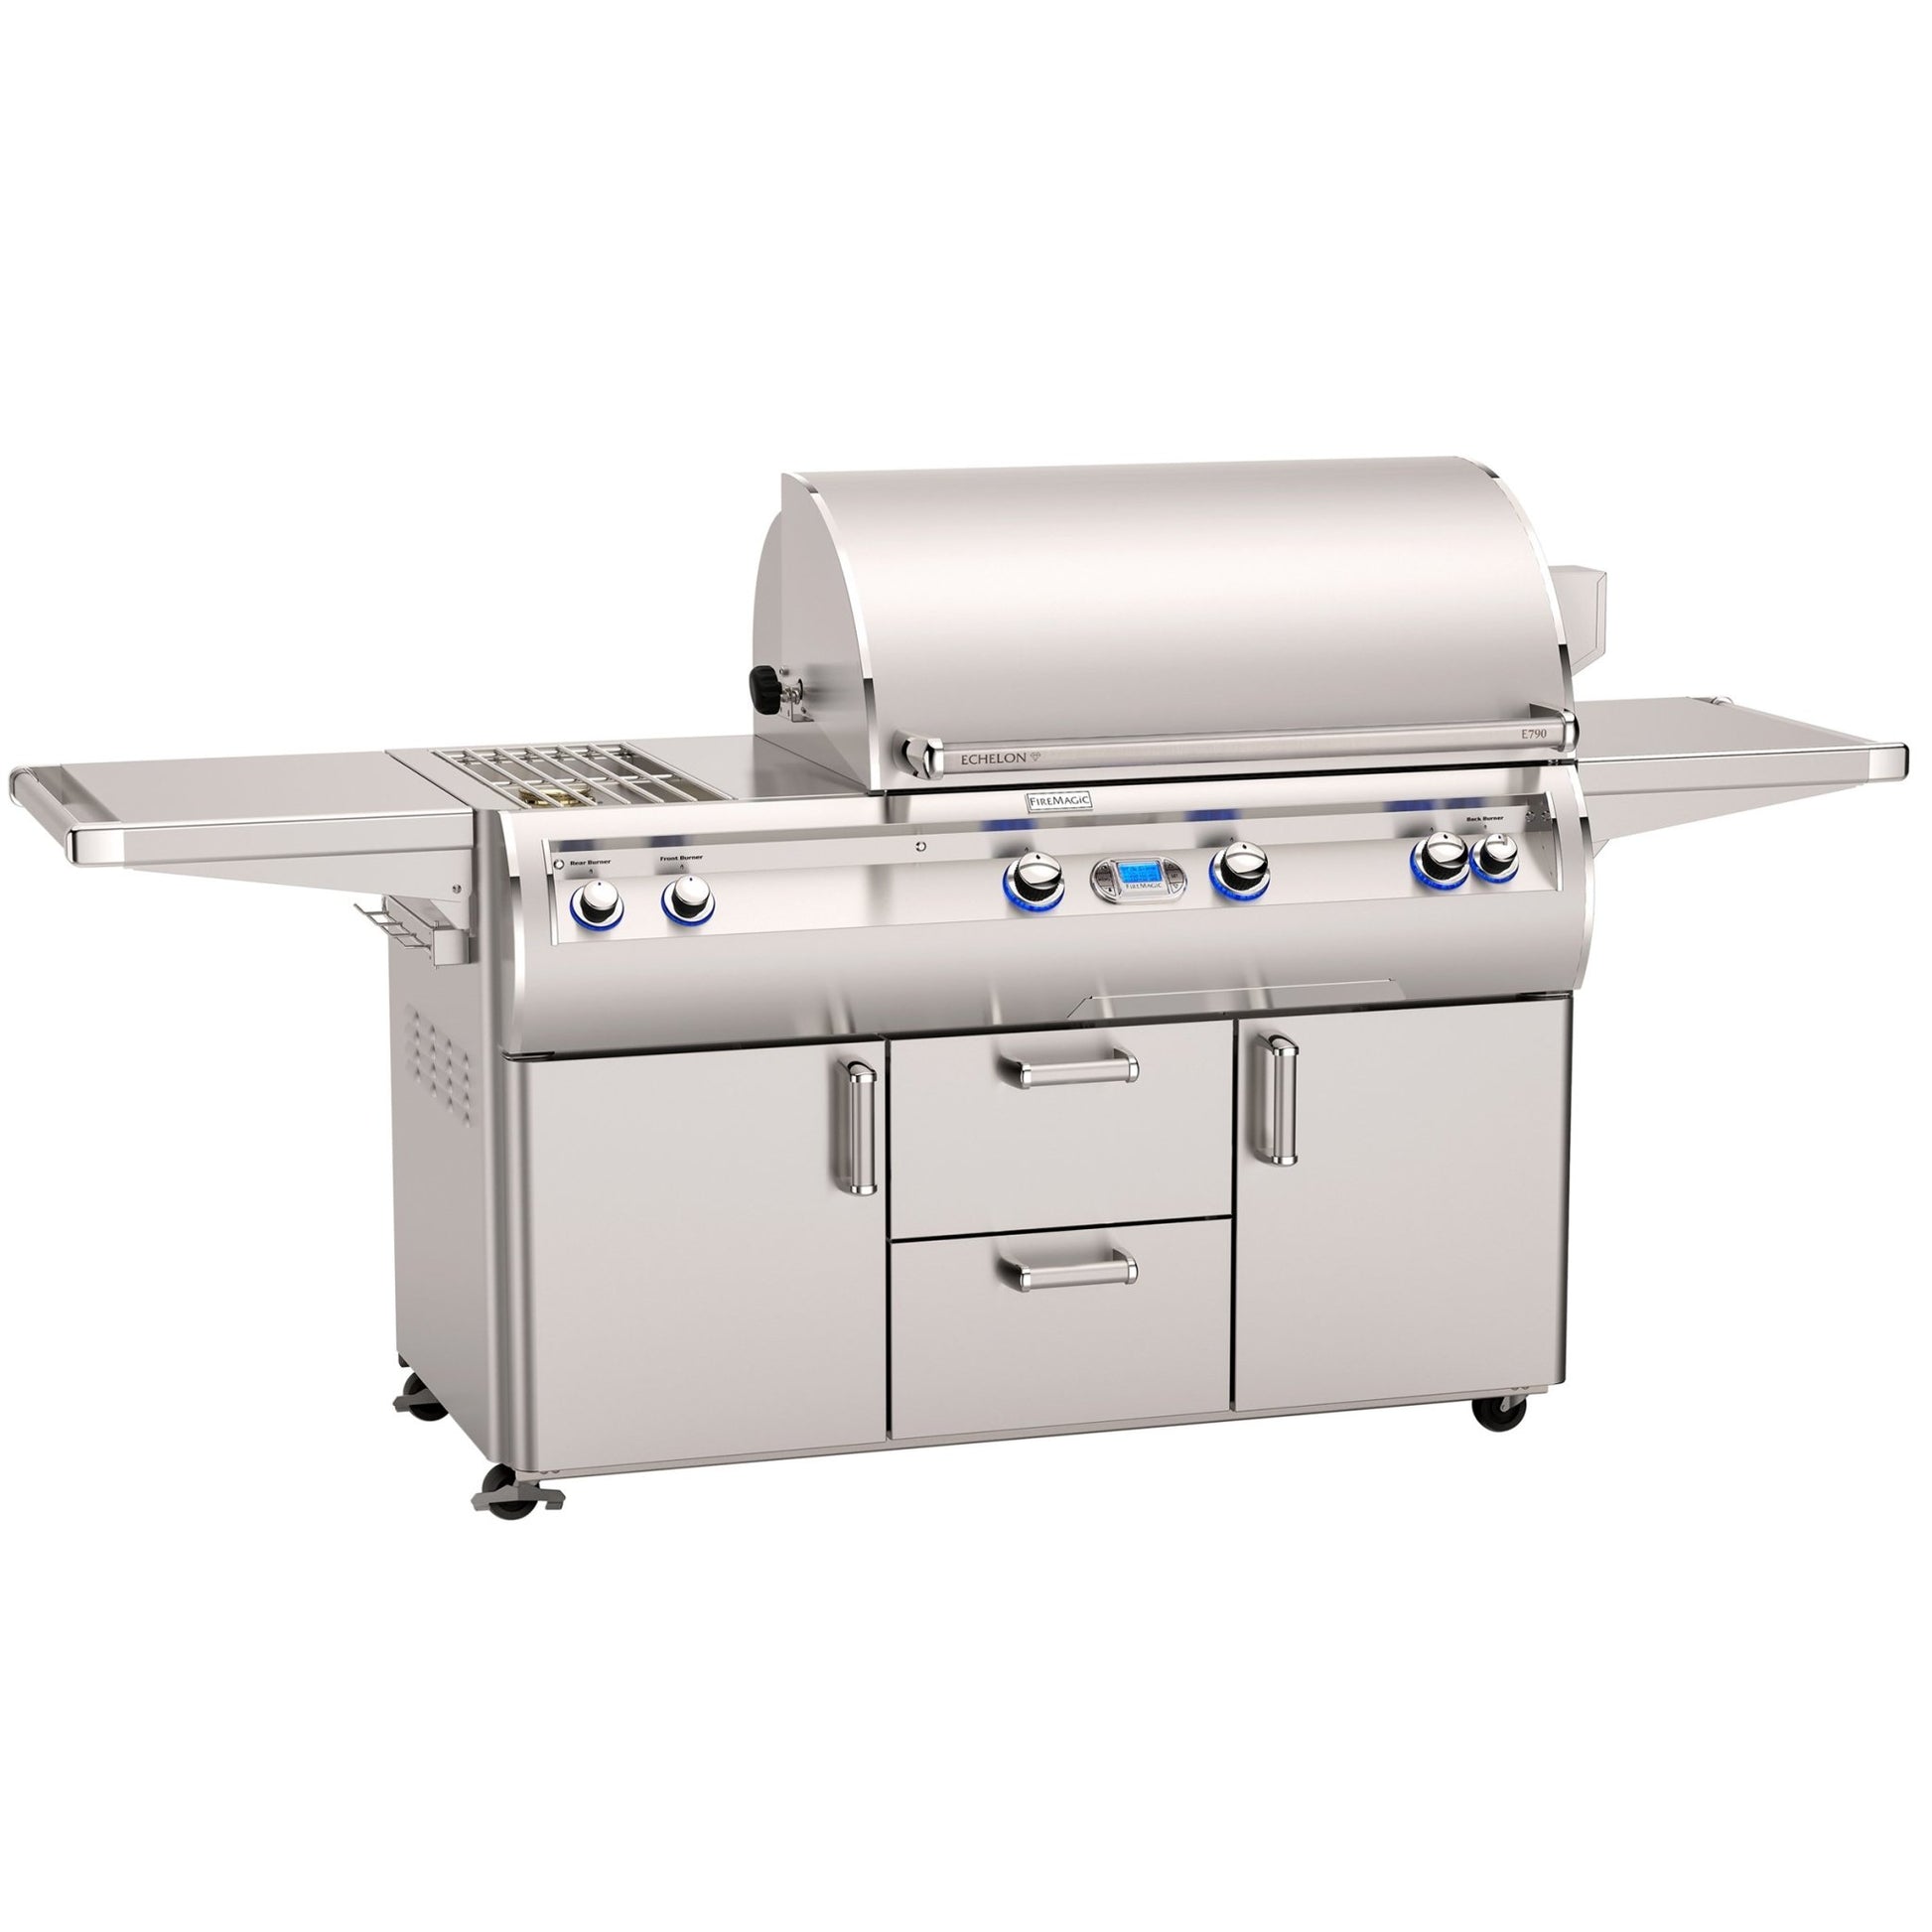 Fire Magic Echelon 36-Inch Portable Gas Grill, Double Side Burner, W/ Rotisserie & Digital Thermometer - grillsNmore.com